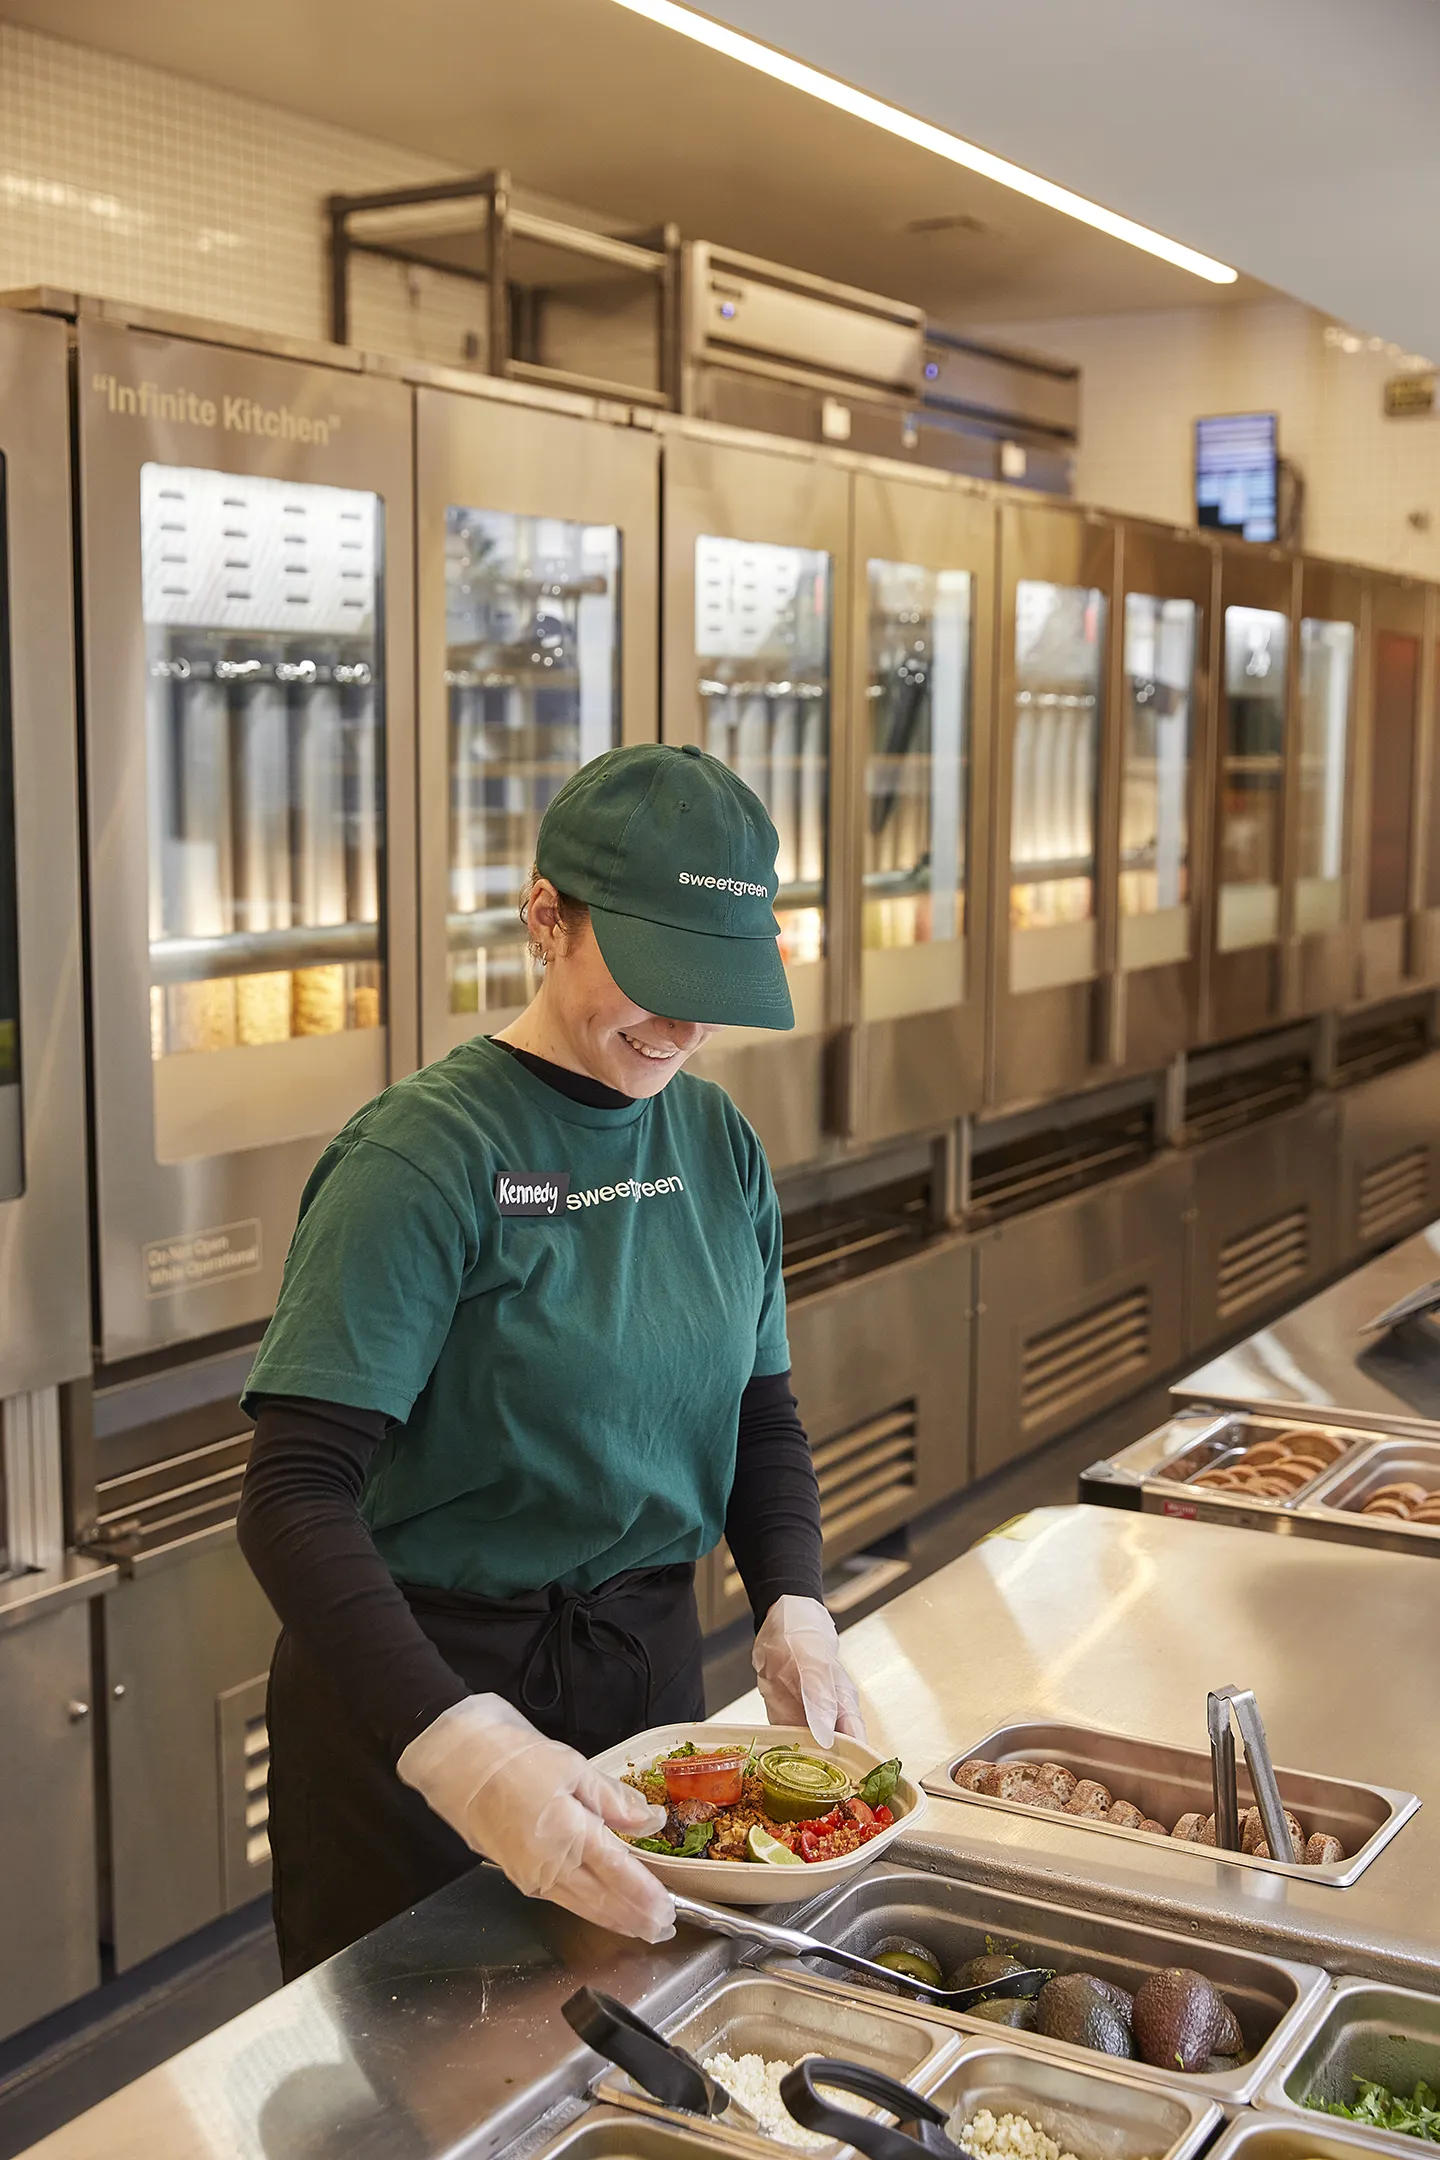 Each location is still staffed by sweetgreen employees, allowing for human interaction and additional assistance with orders.